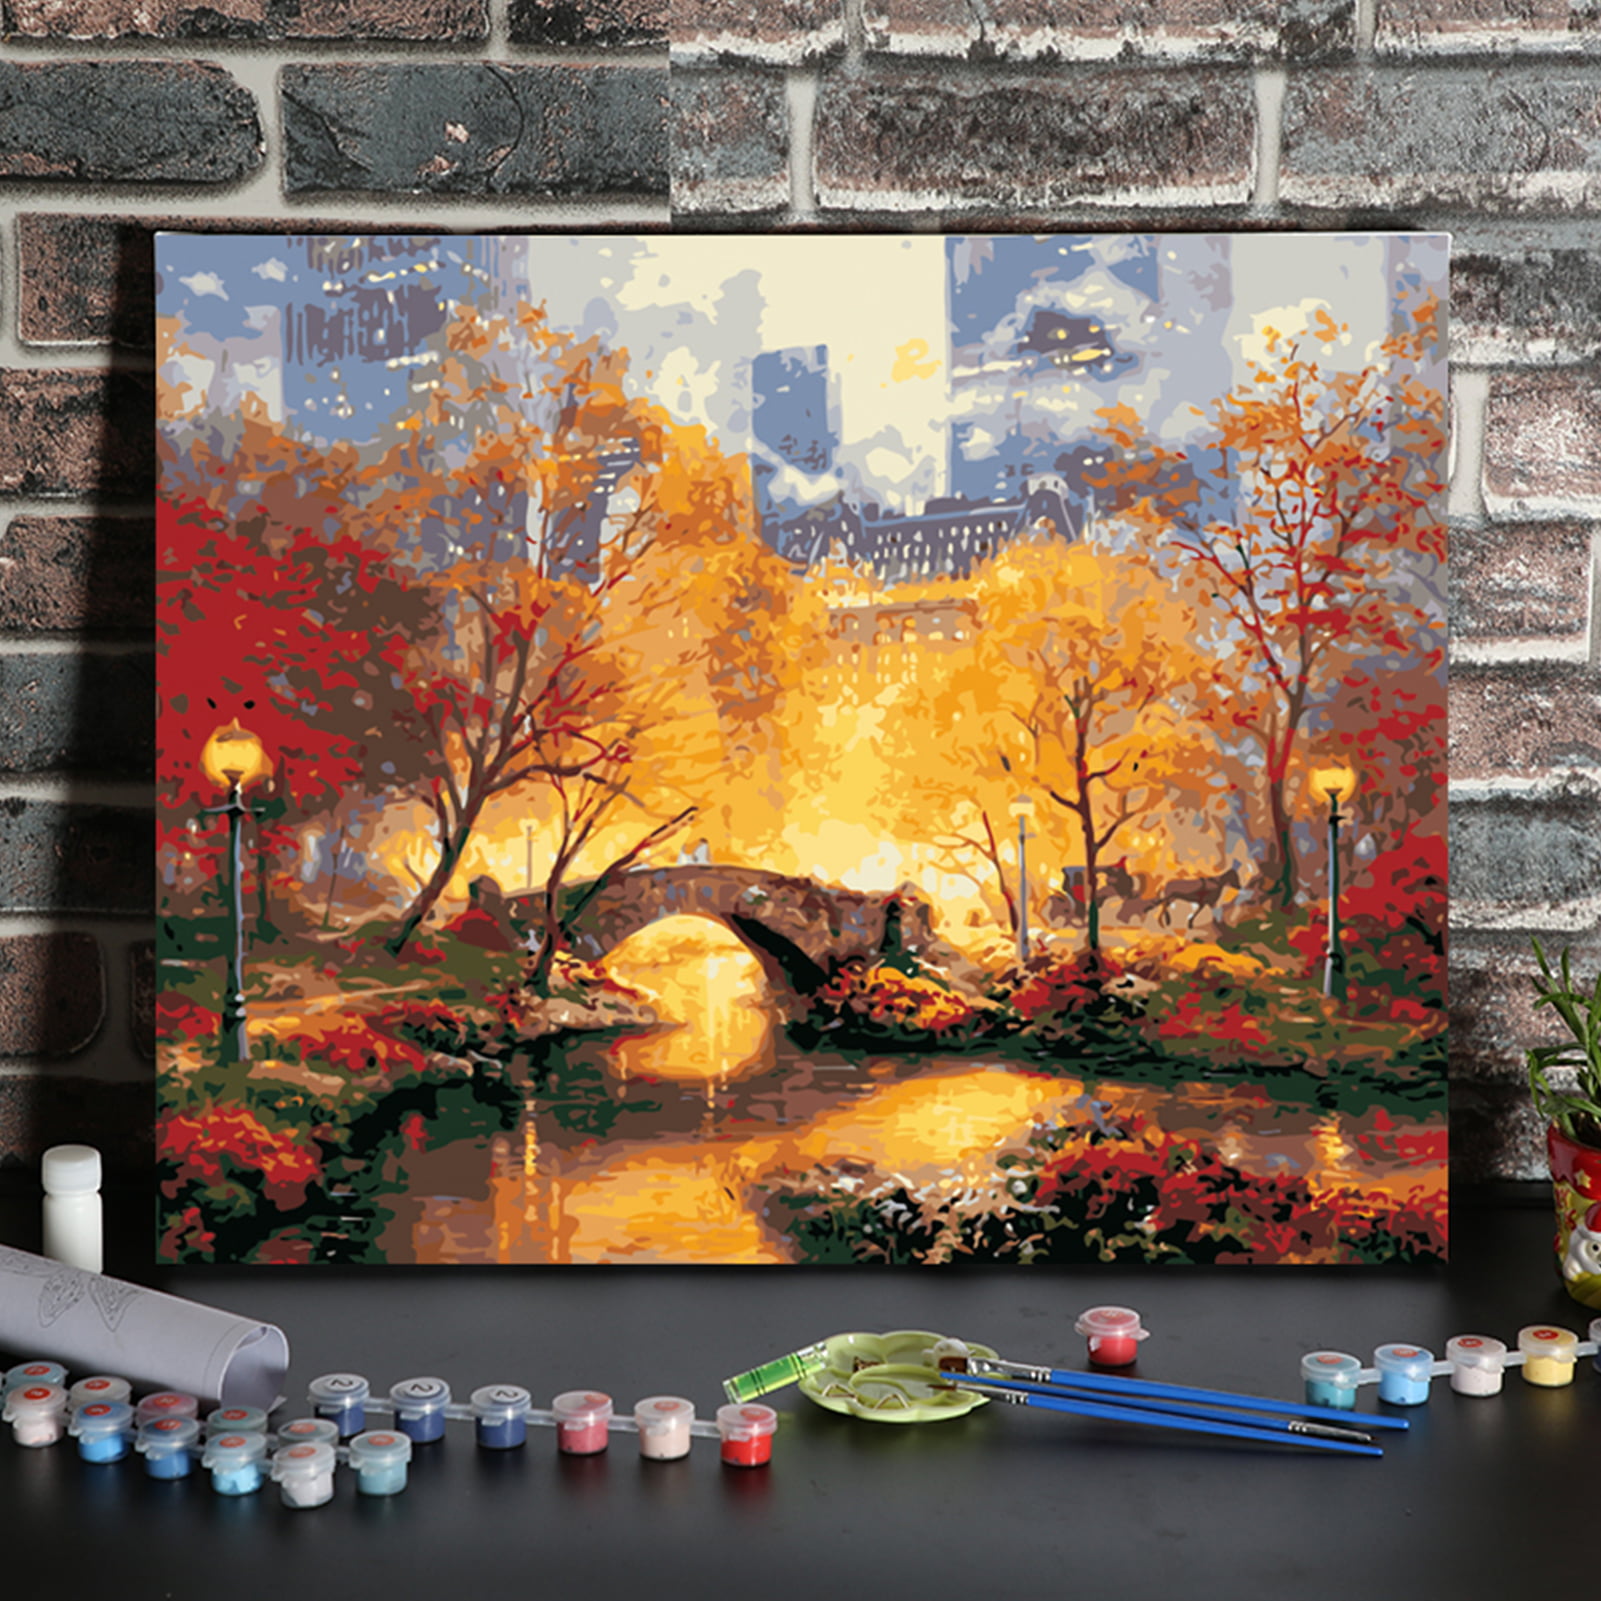 12x16 Inch DIY Oil Painting on Canvas Paint by Number Kit Sunset Pattern T2W7 